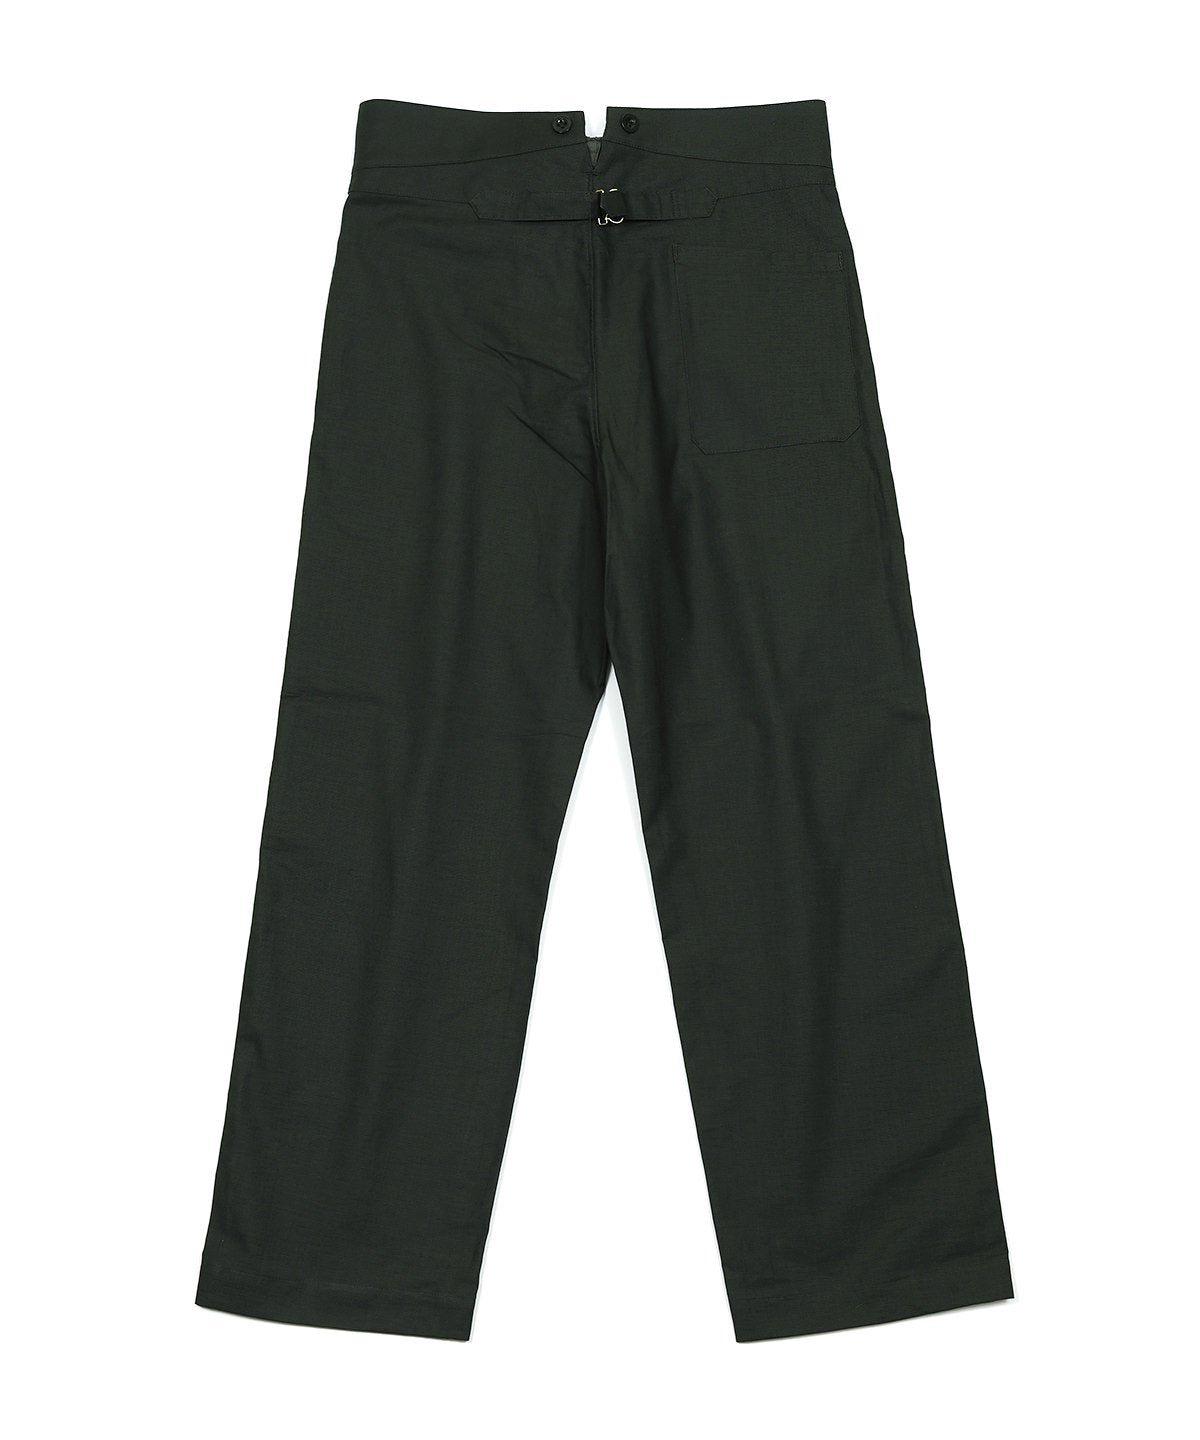 PANAMA CLOTH FRENCH TROUSER